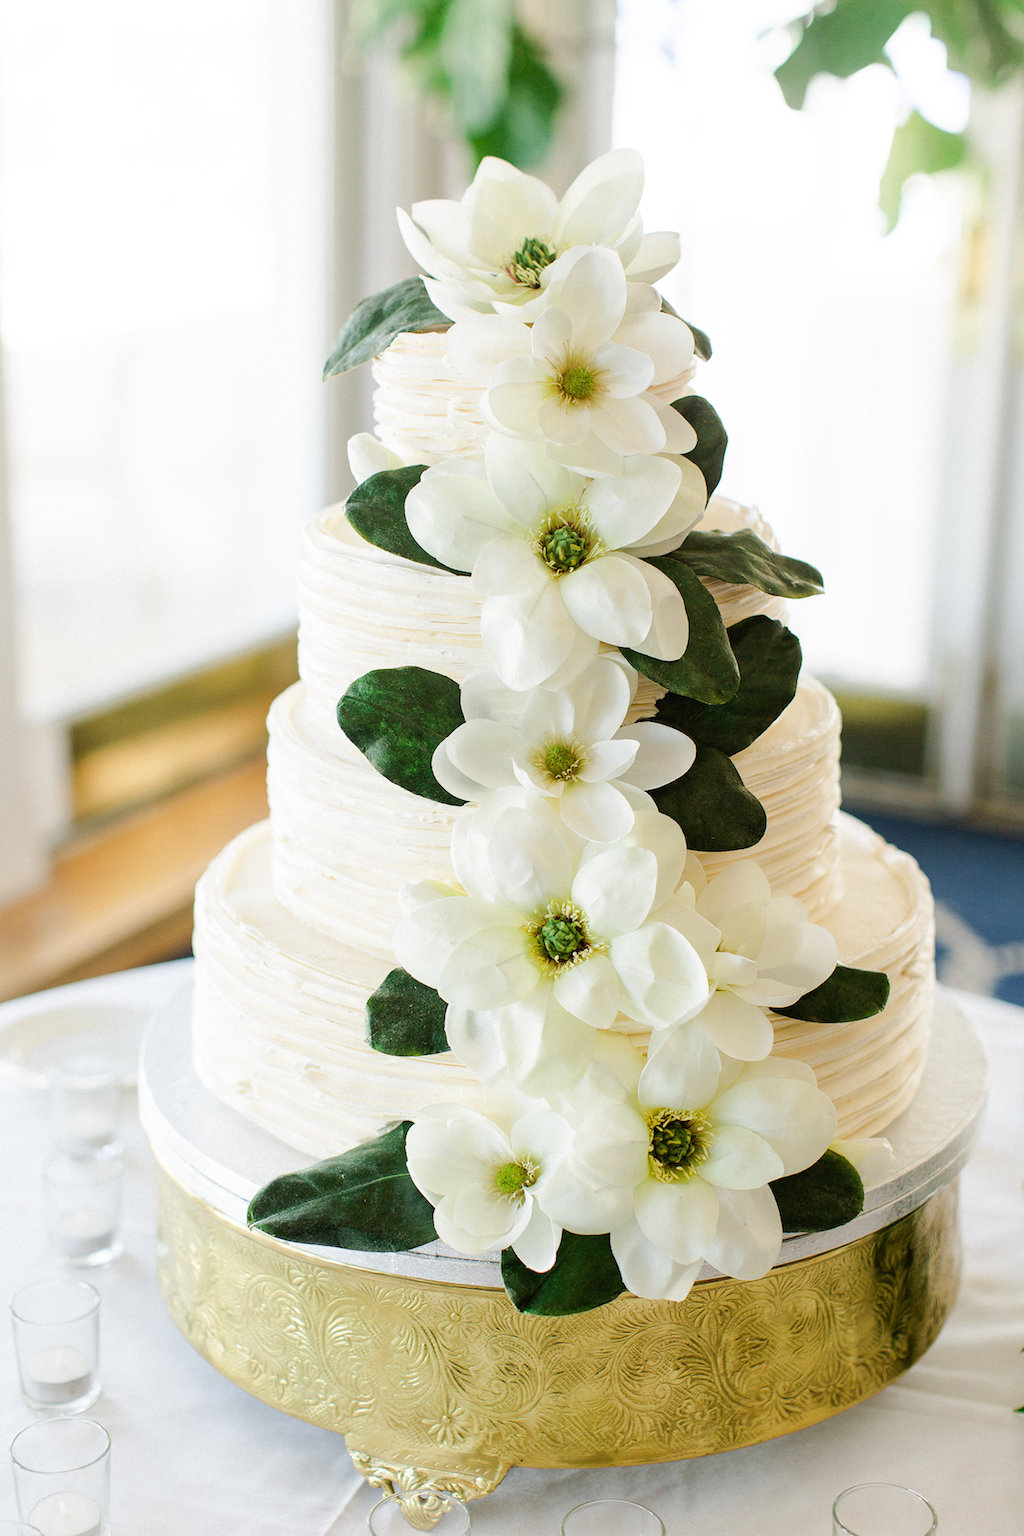 Four Tiered Round White Wedding Cake with White Magnolia and Greenery Flowers on Gold Cake Tray